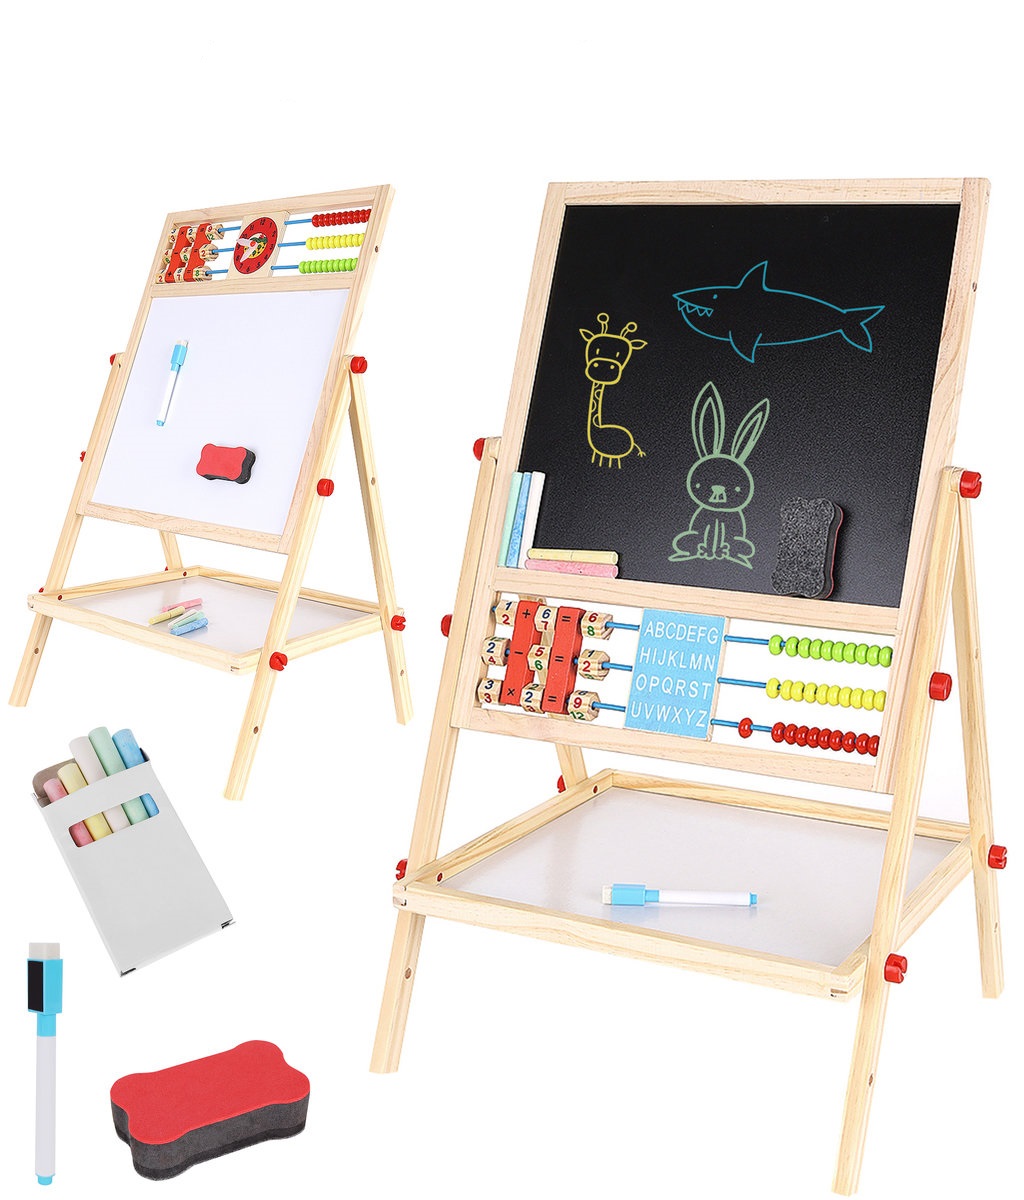 Children's Double-sided Drawing Board with Accessories Counter Clock, 67х41х32 сm